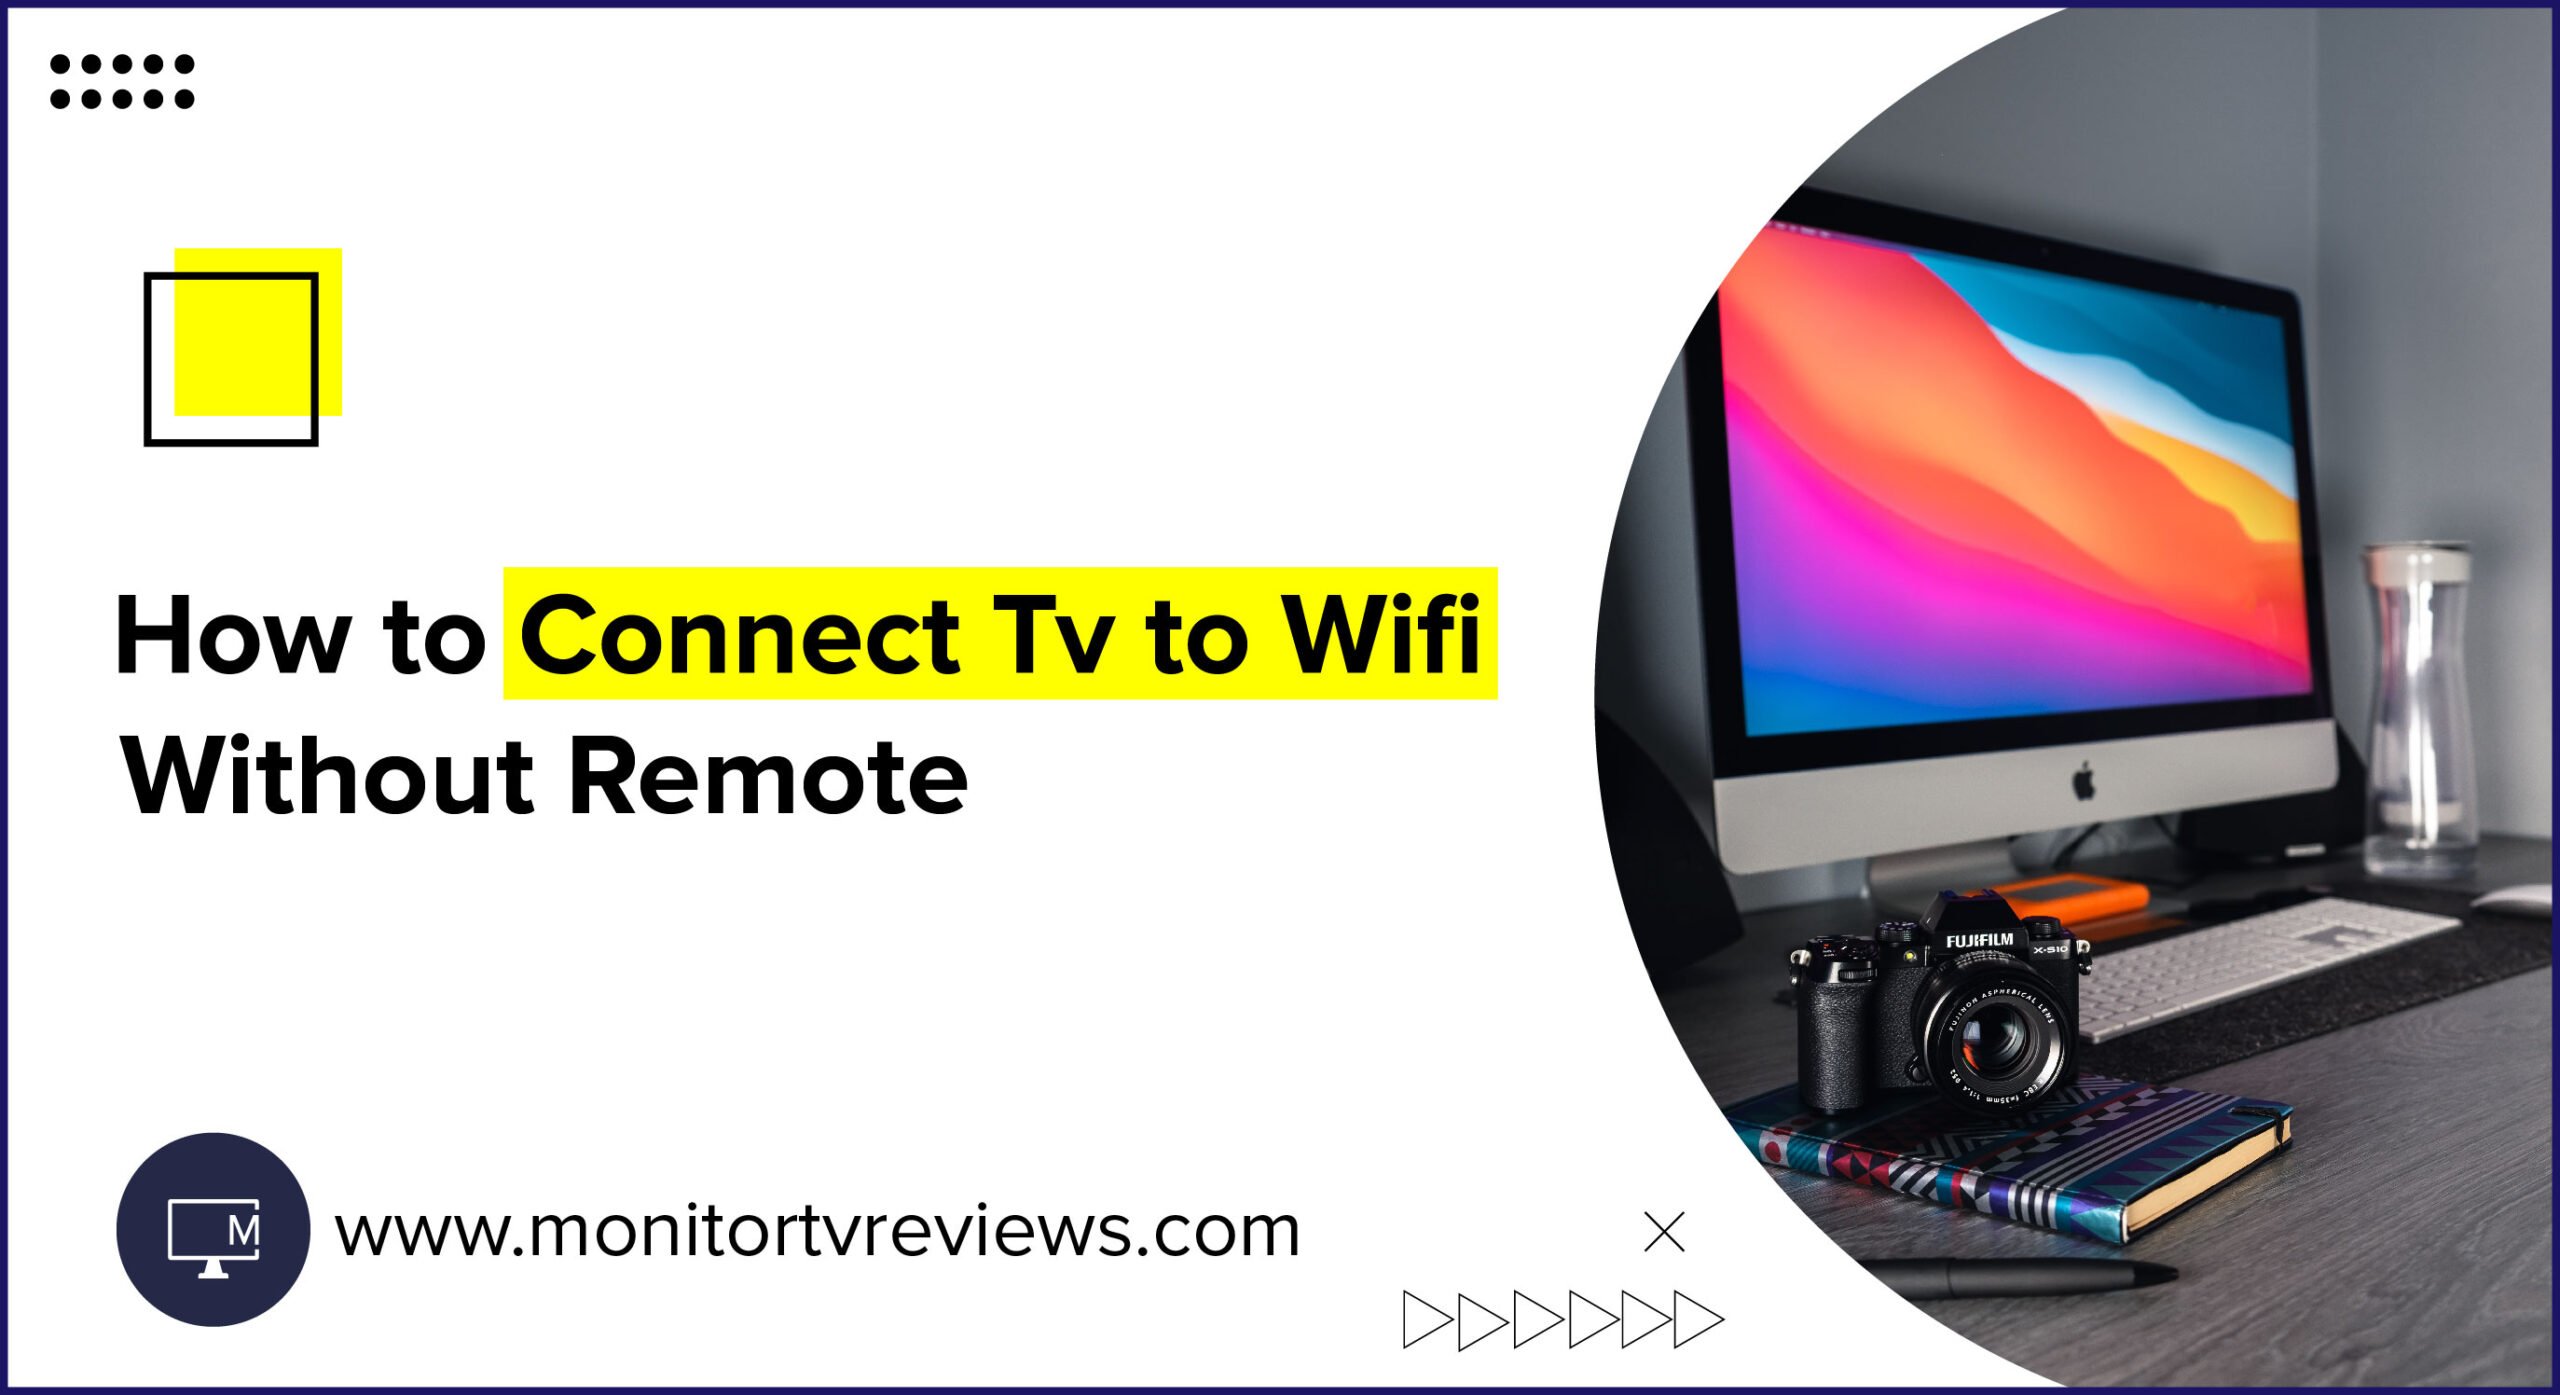 7 Steps for How to Connect TV to Wifi Without Remote